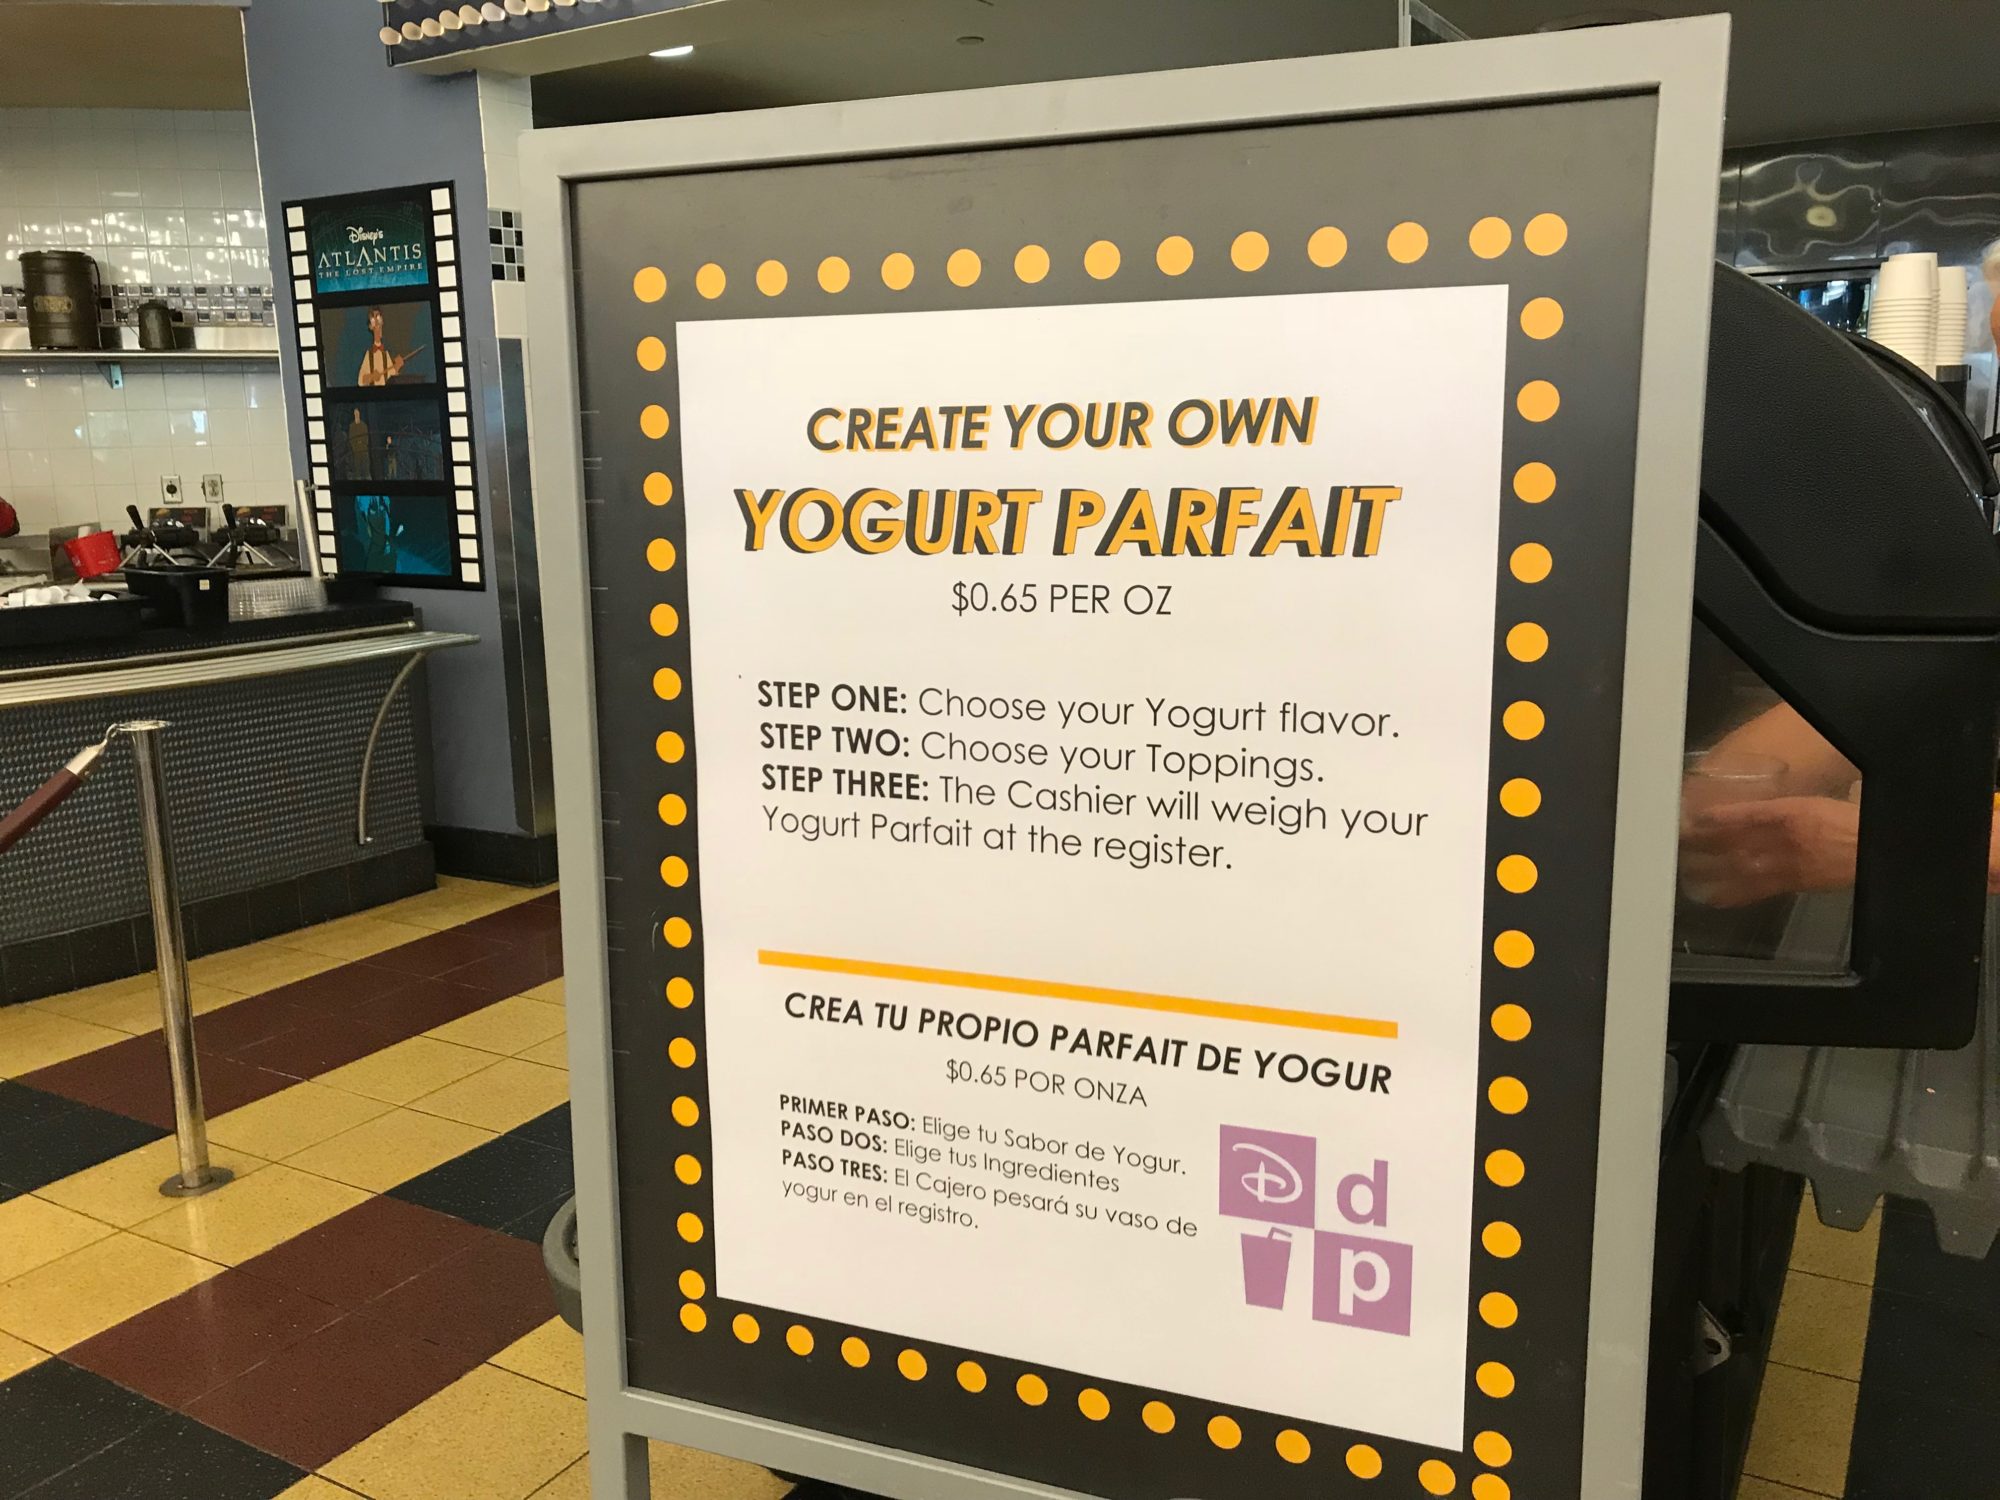 Create Your Own Yogurt Parfait at All-Star Movies